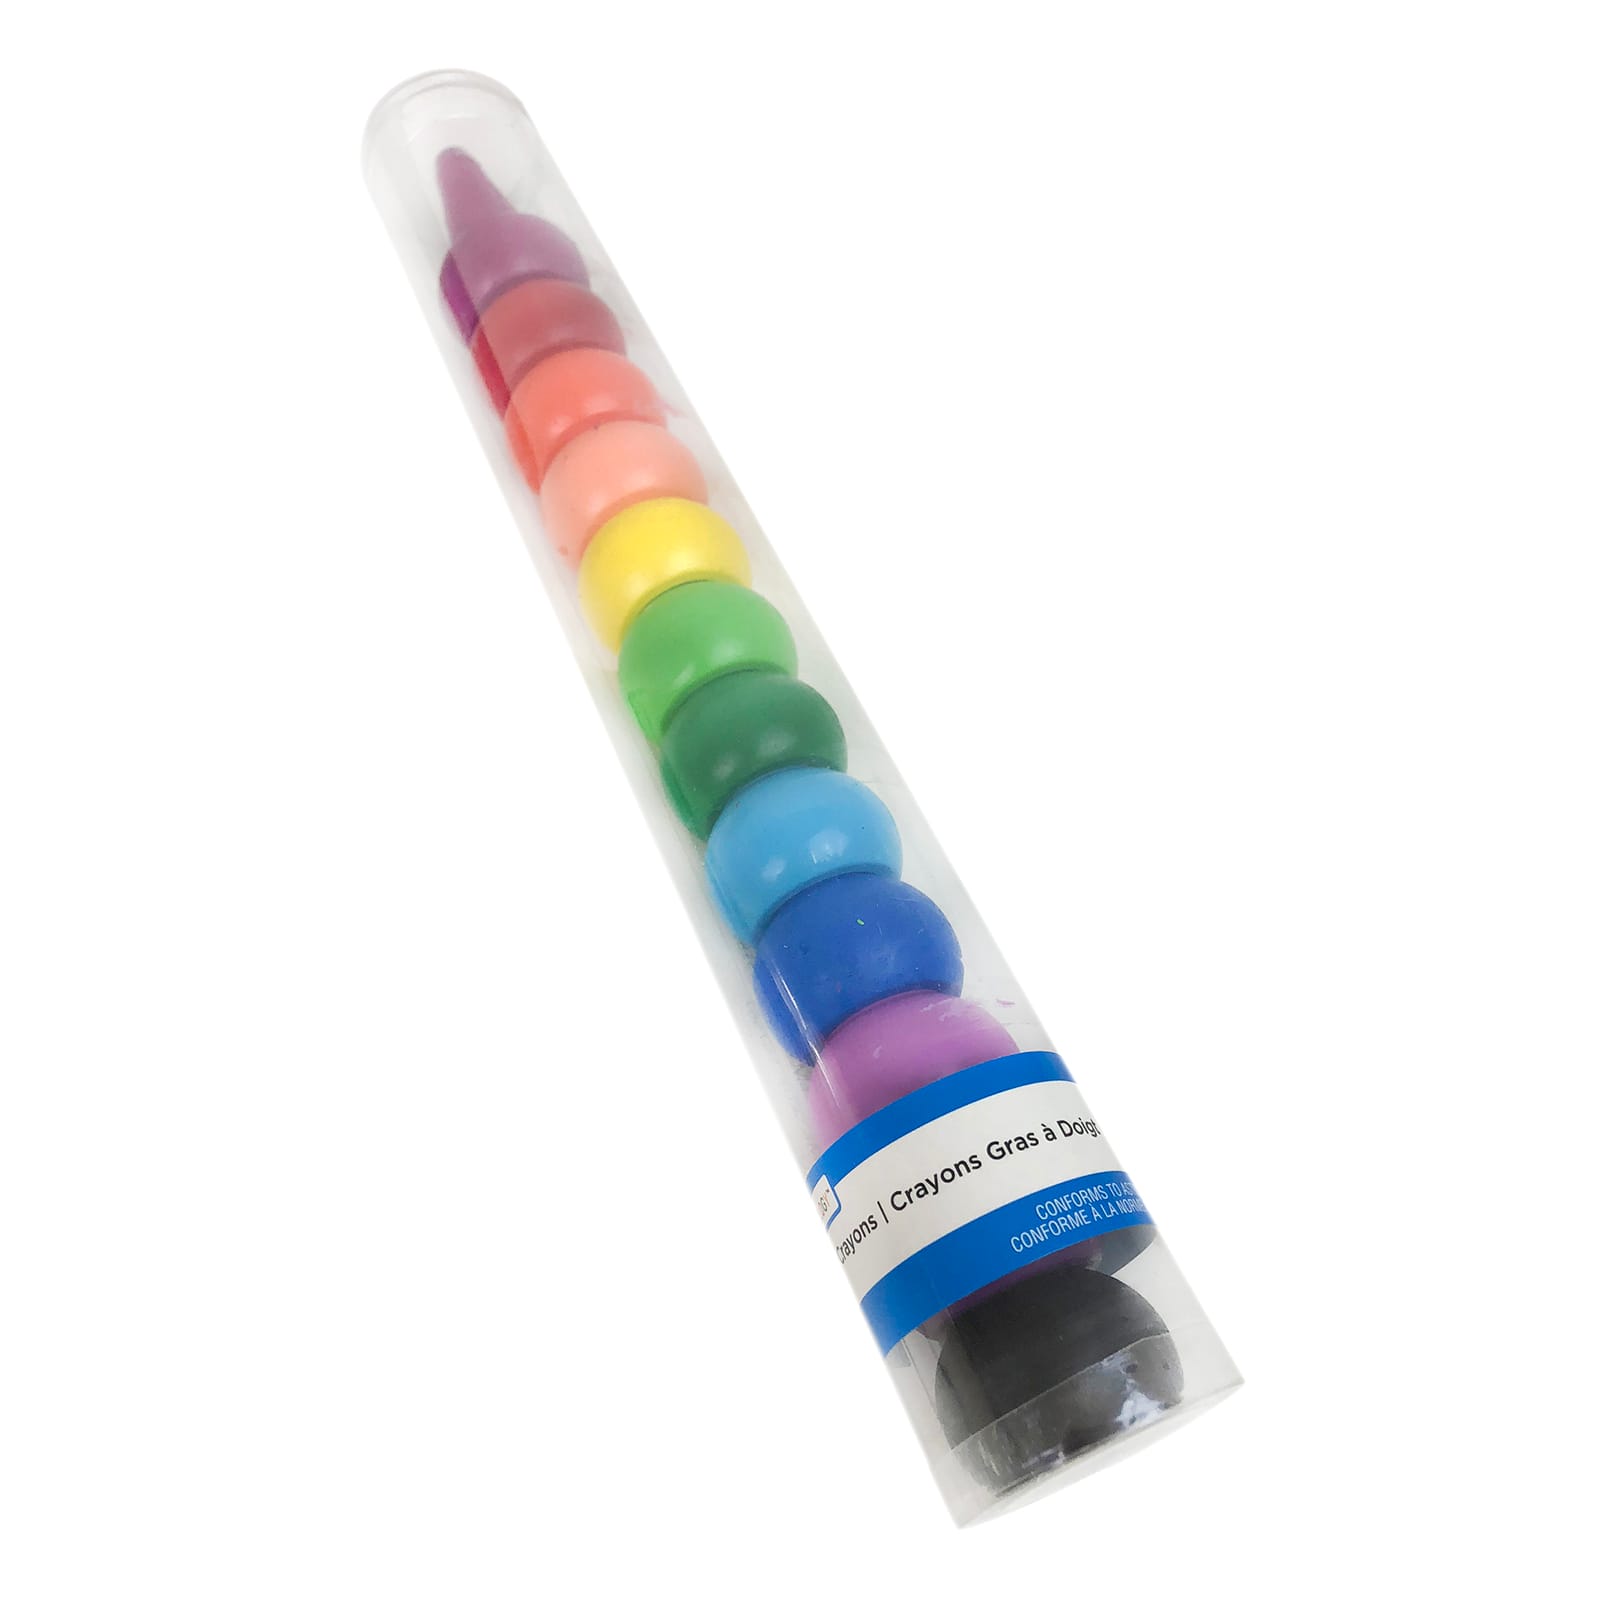 Stacking Crayons by Creatology | Michaels Kids